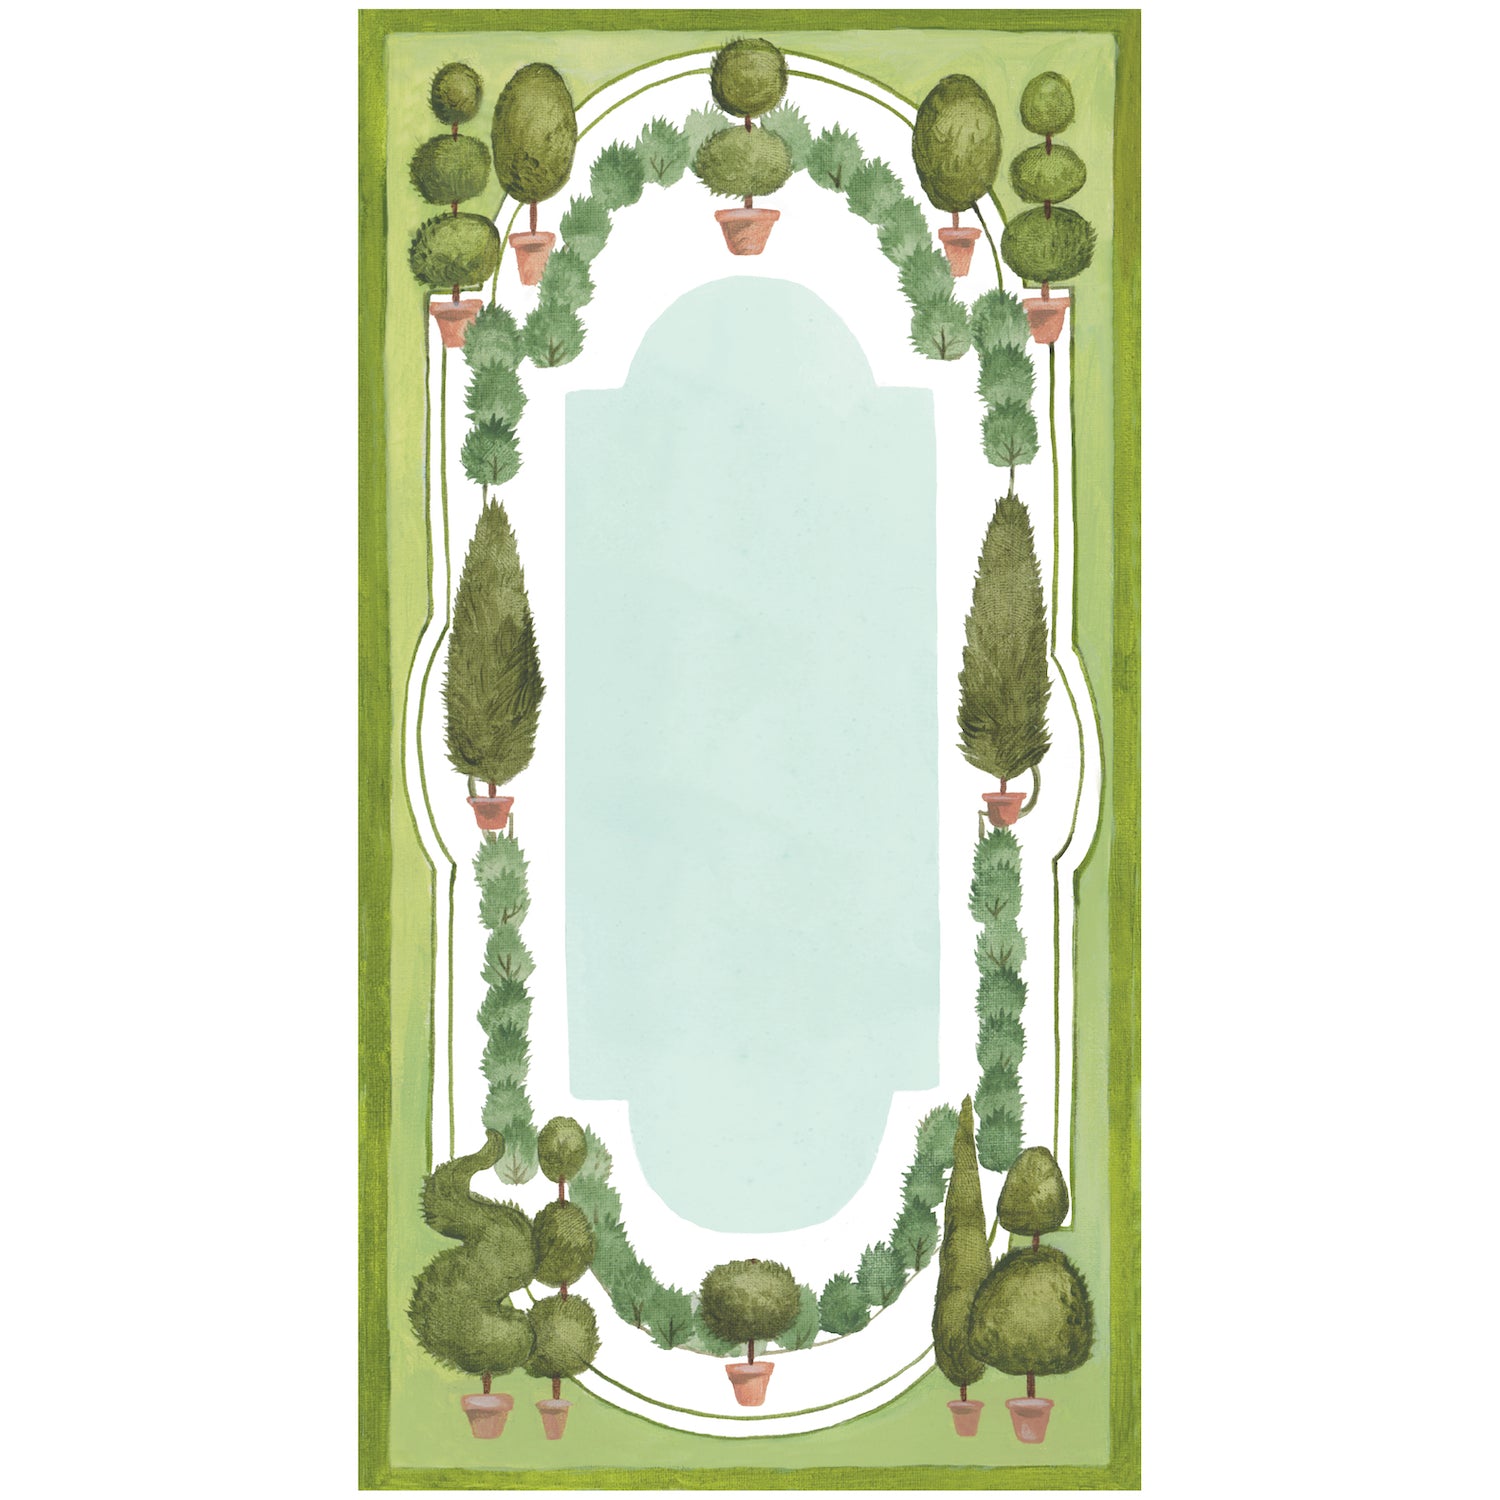 A rectangle card resembling an illustrated garden framed in green with potted manicured shrubs surrounding a seafoam blue garden pool, creating an area for personalization.